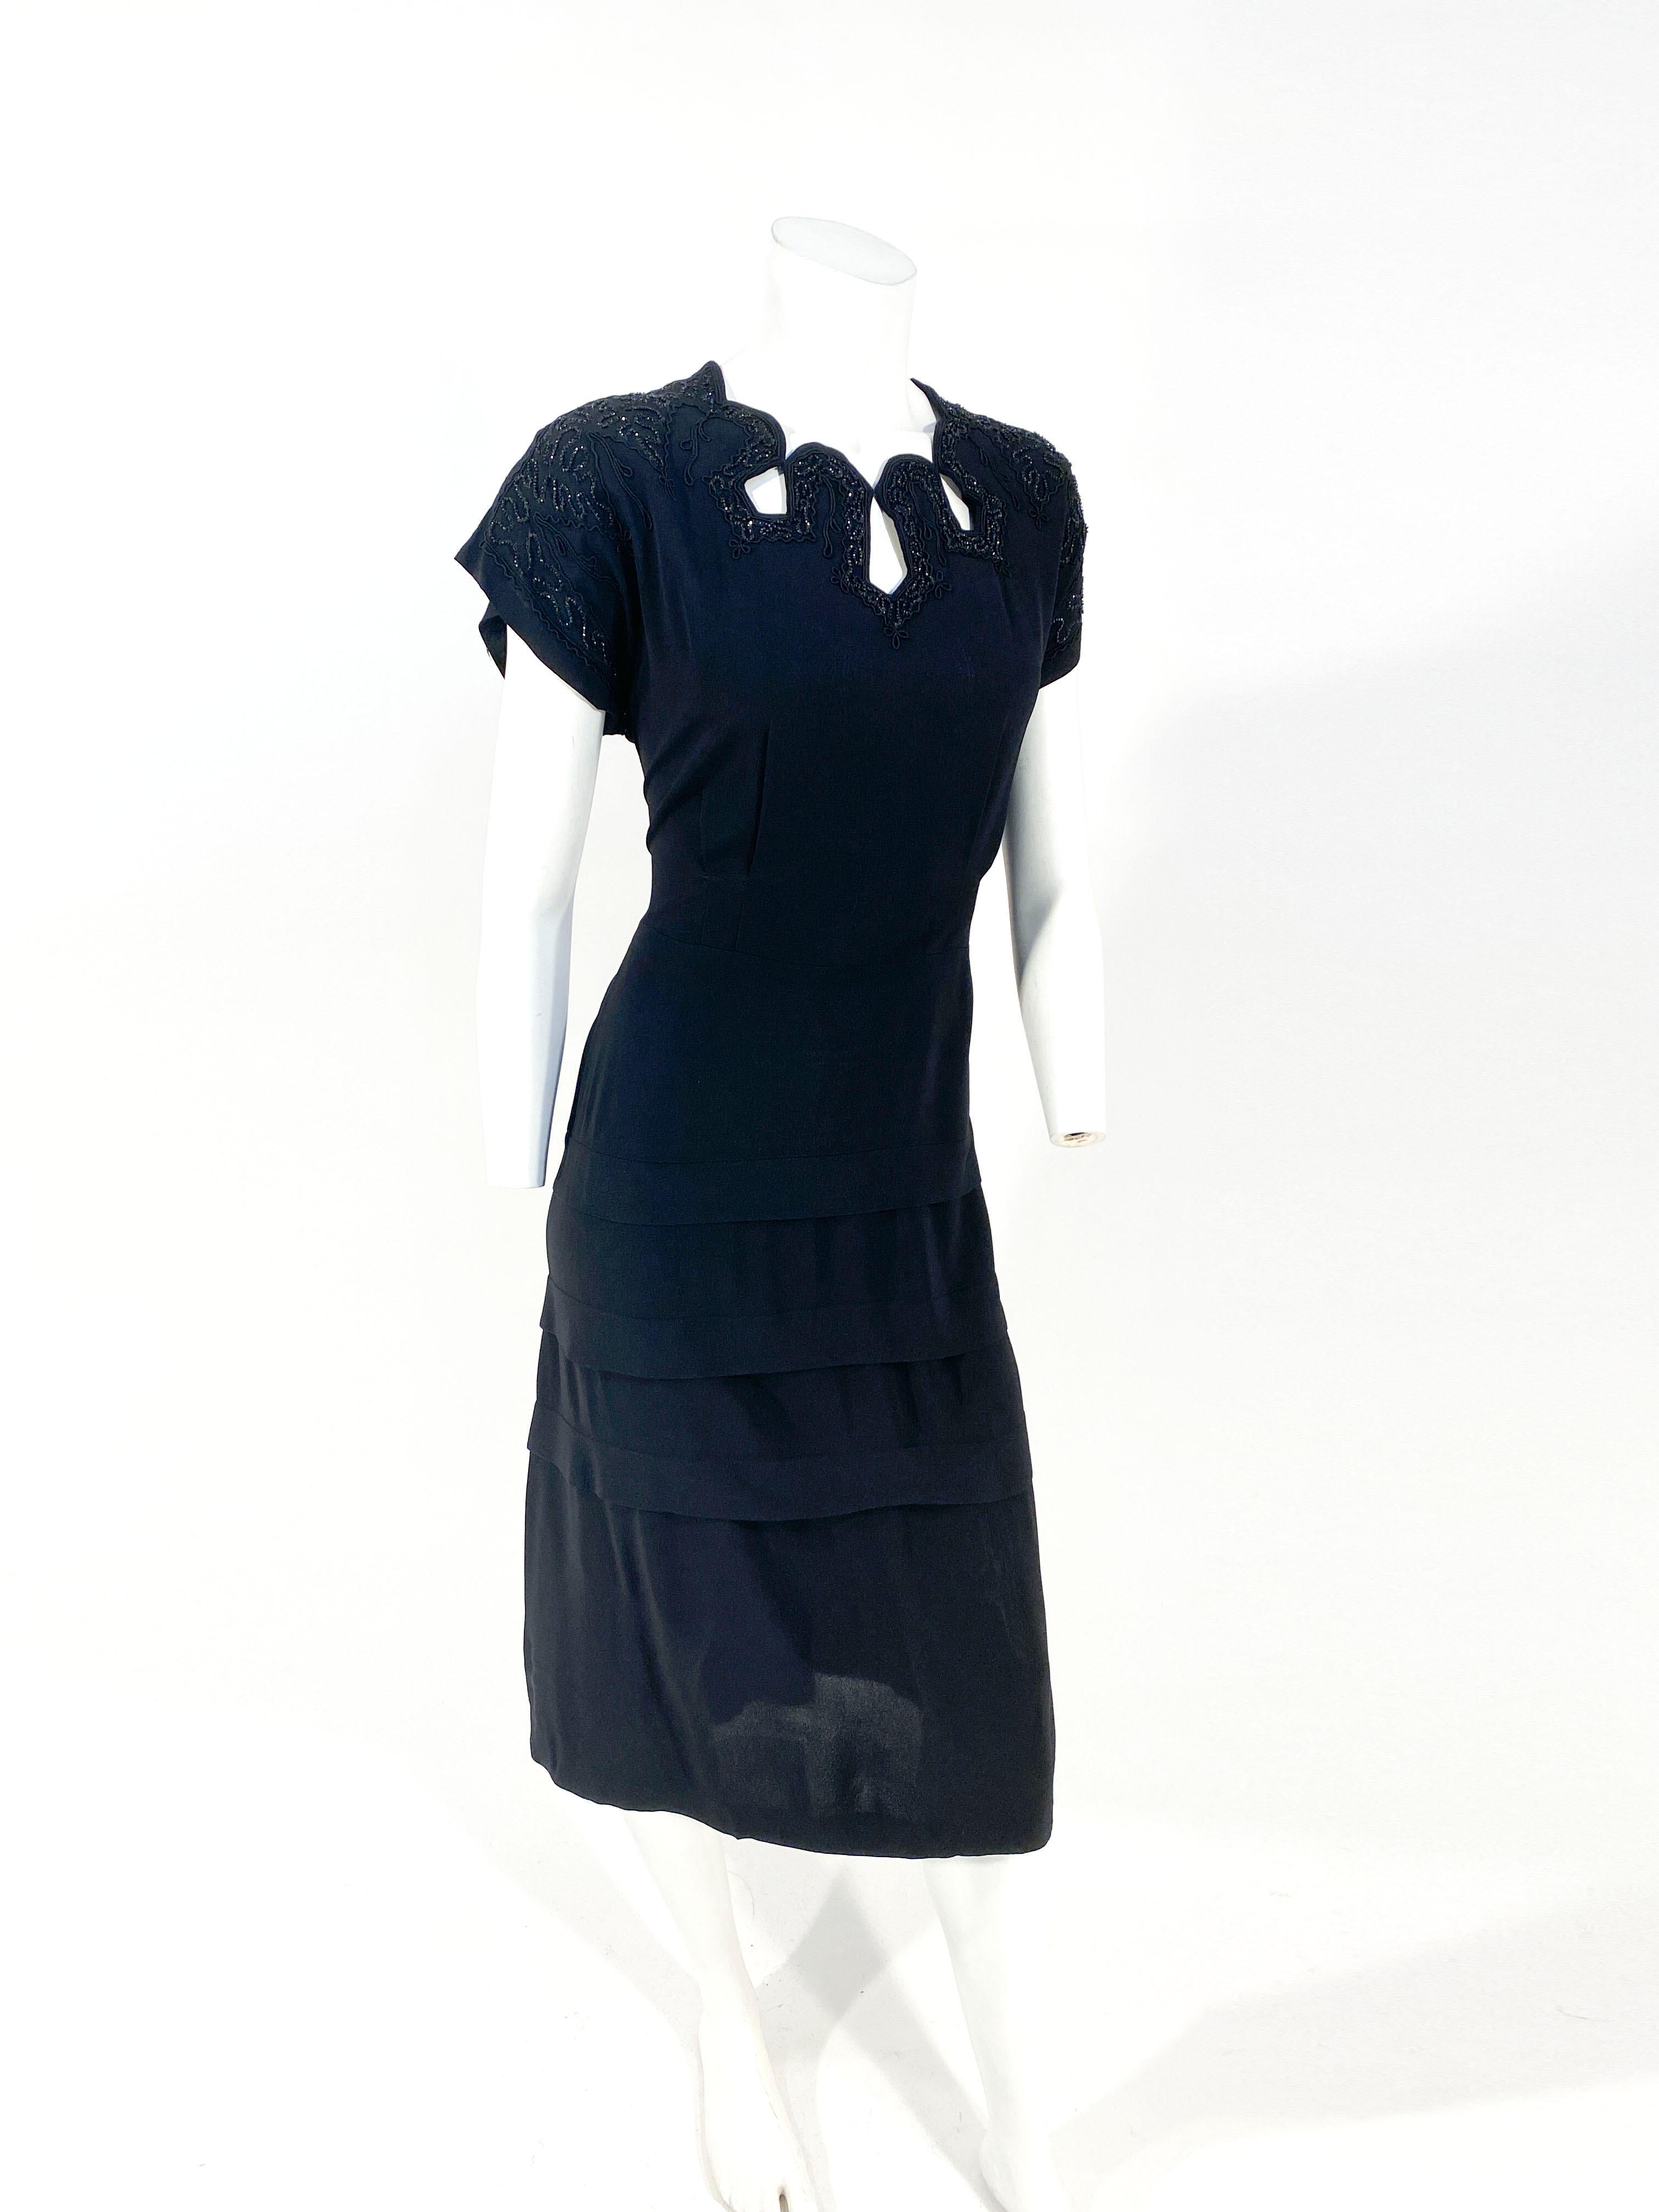 1940s black crepe cocktail dress featuring a decorative cutout neckline accented with soutache and beading extending the the cap sleeves. The skirt of the dress has three horizontal knife pleats. This dress has a side metal zipper and a back zipper